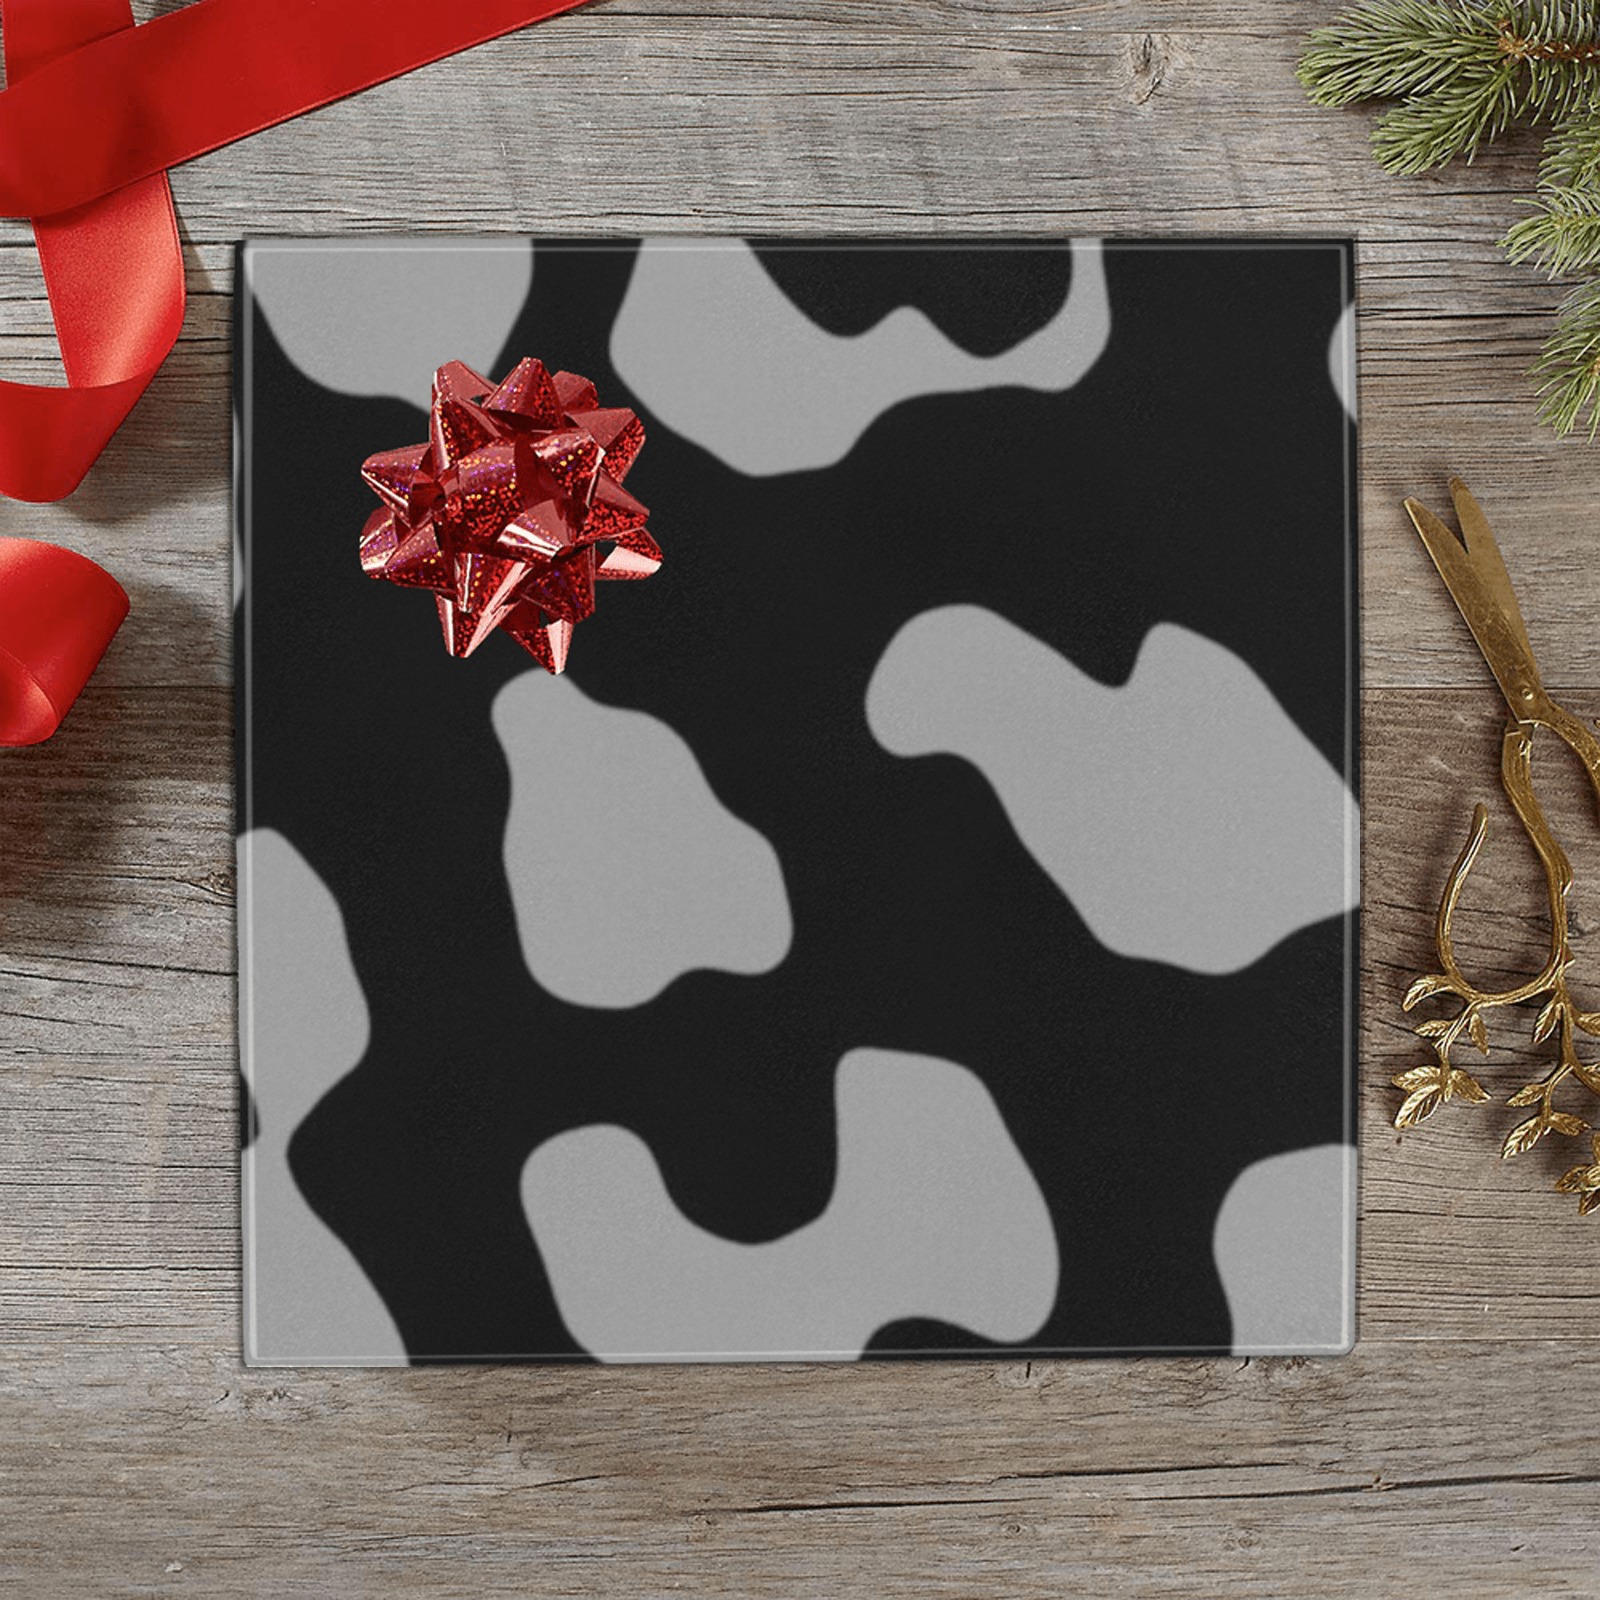 Leopard Print Black Gray Gift Wrapping Paper 58"x 23" (1 Roll)